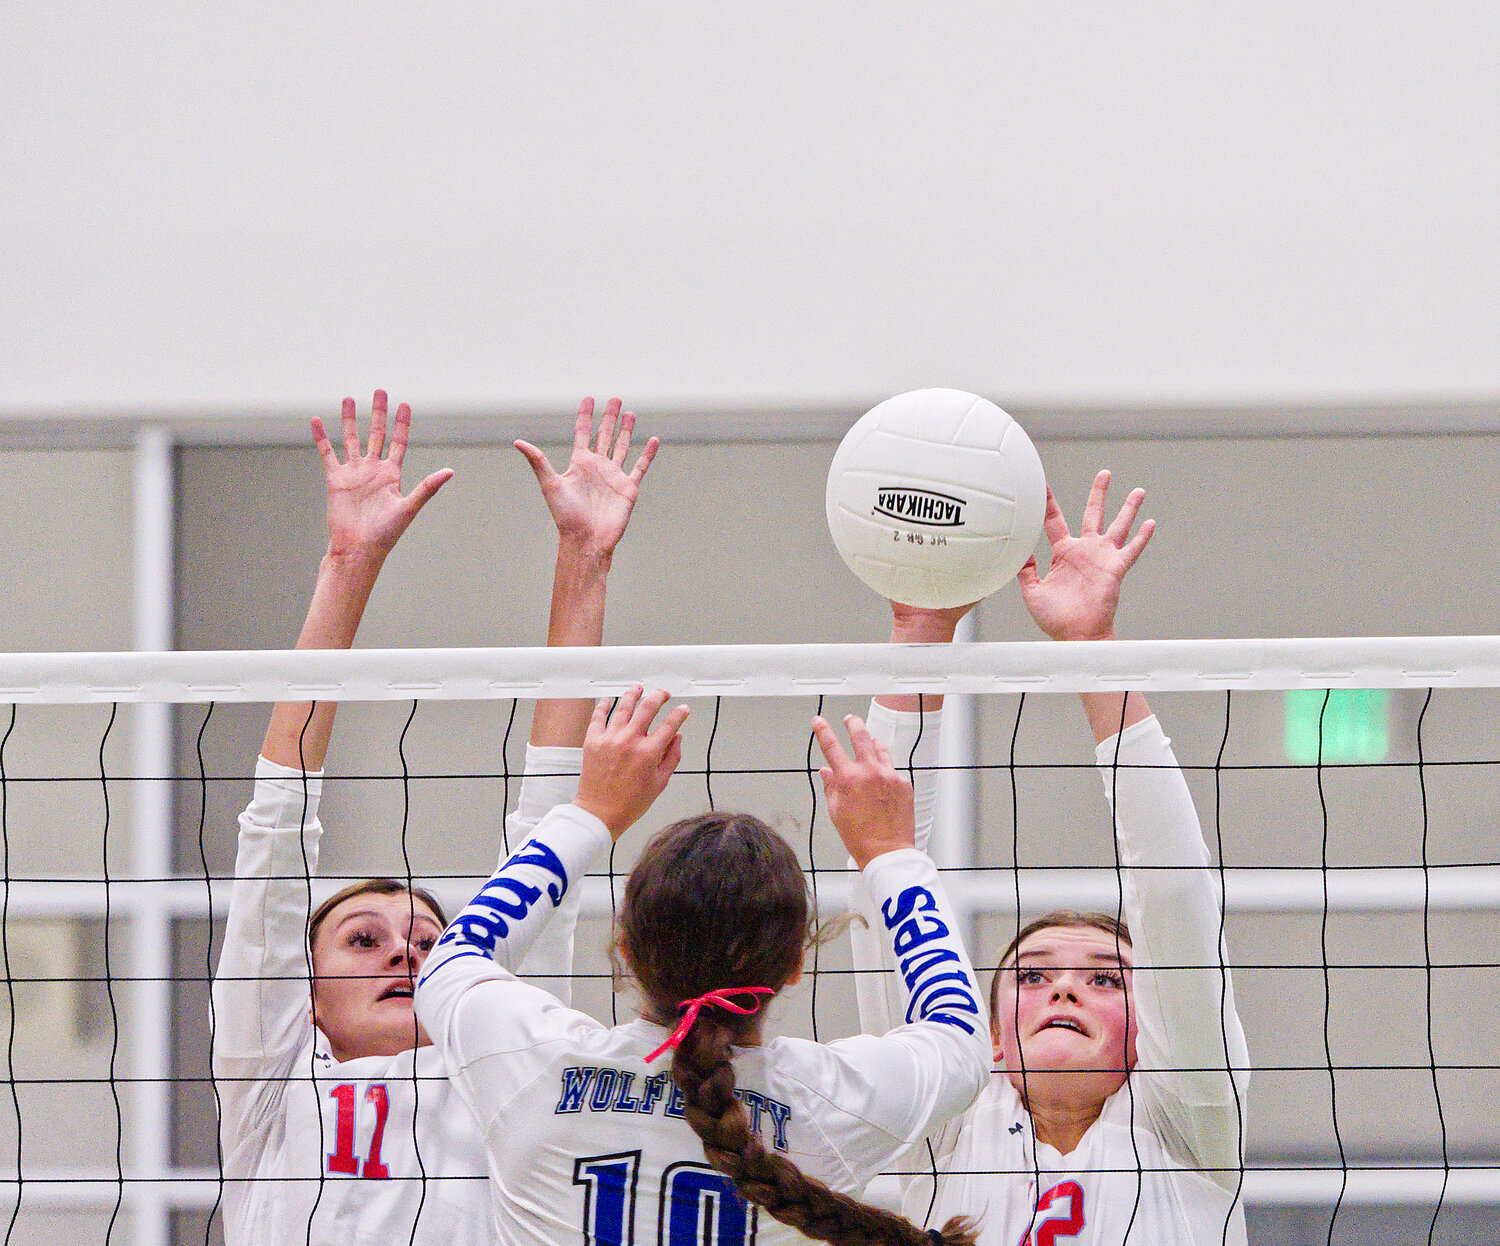 Bailee Bishop and Alexis Wilmut go for the block in the Alba-Golden bidistrict match.